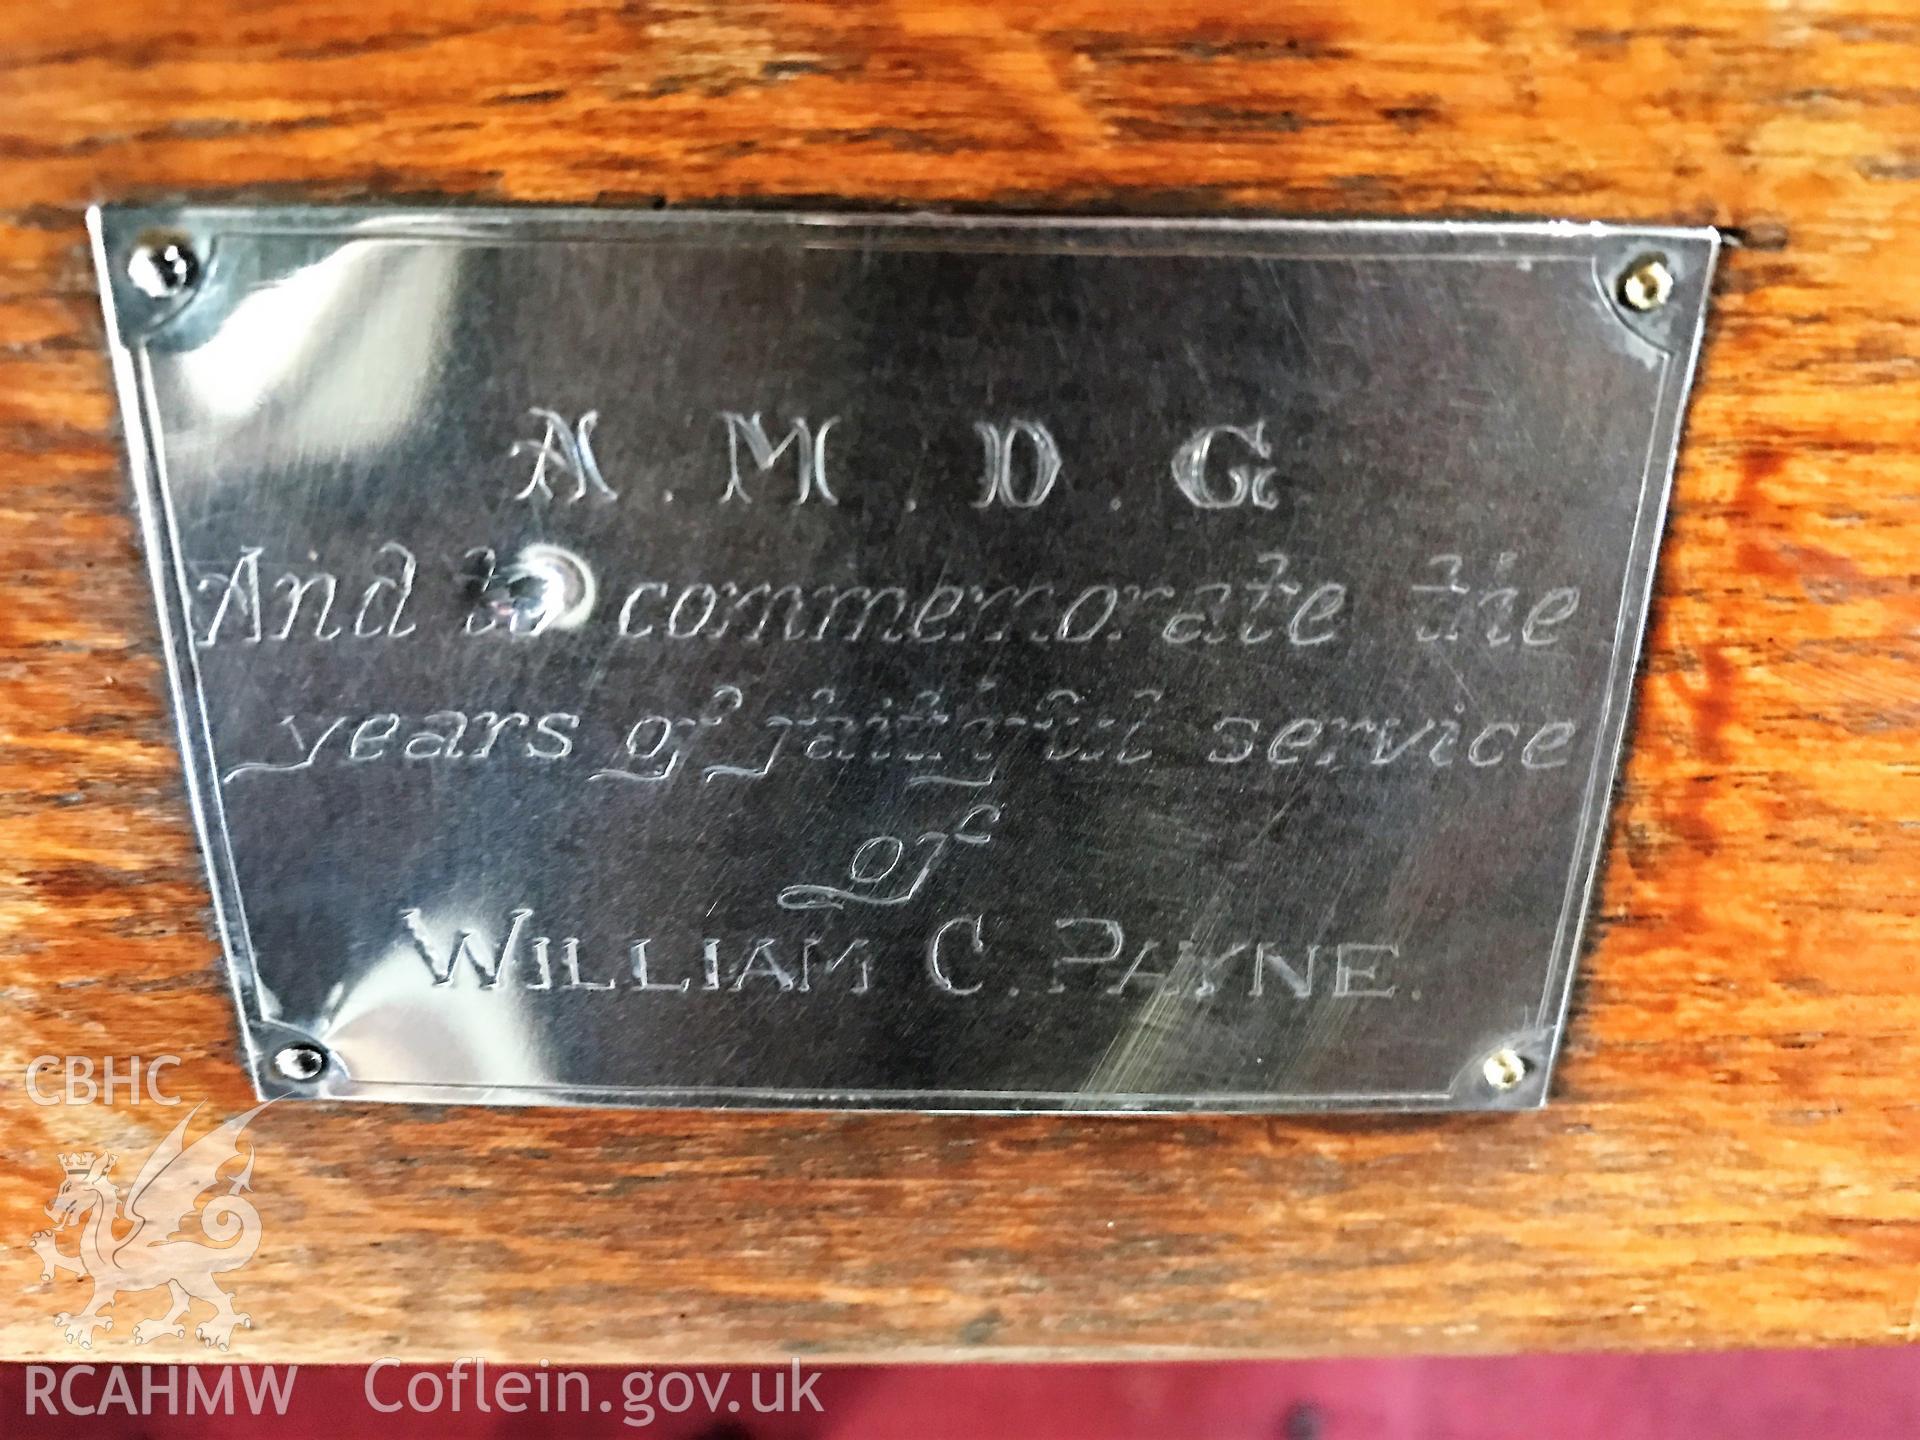 Colour photo showing view of plaque on the free-standing pews at St Paul's Church, Grangetown, taken by Revd David T. Morris, 2018.